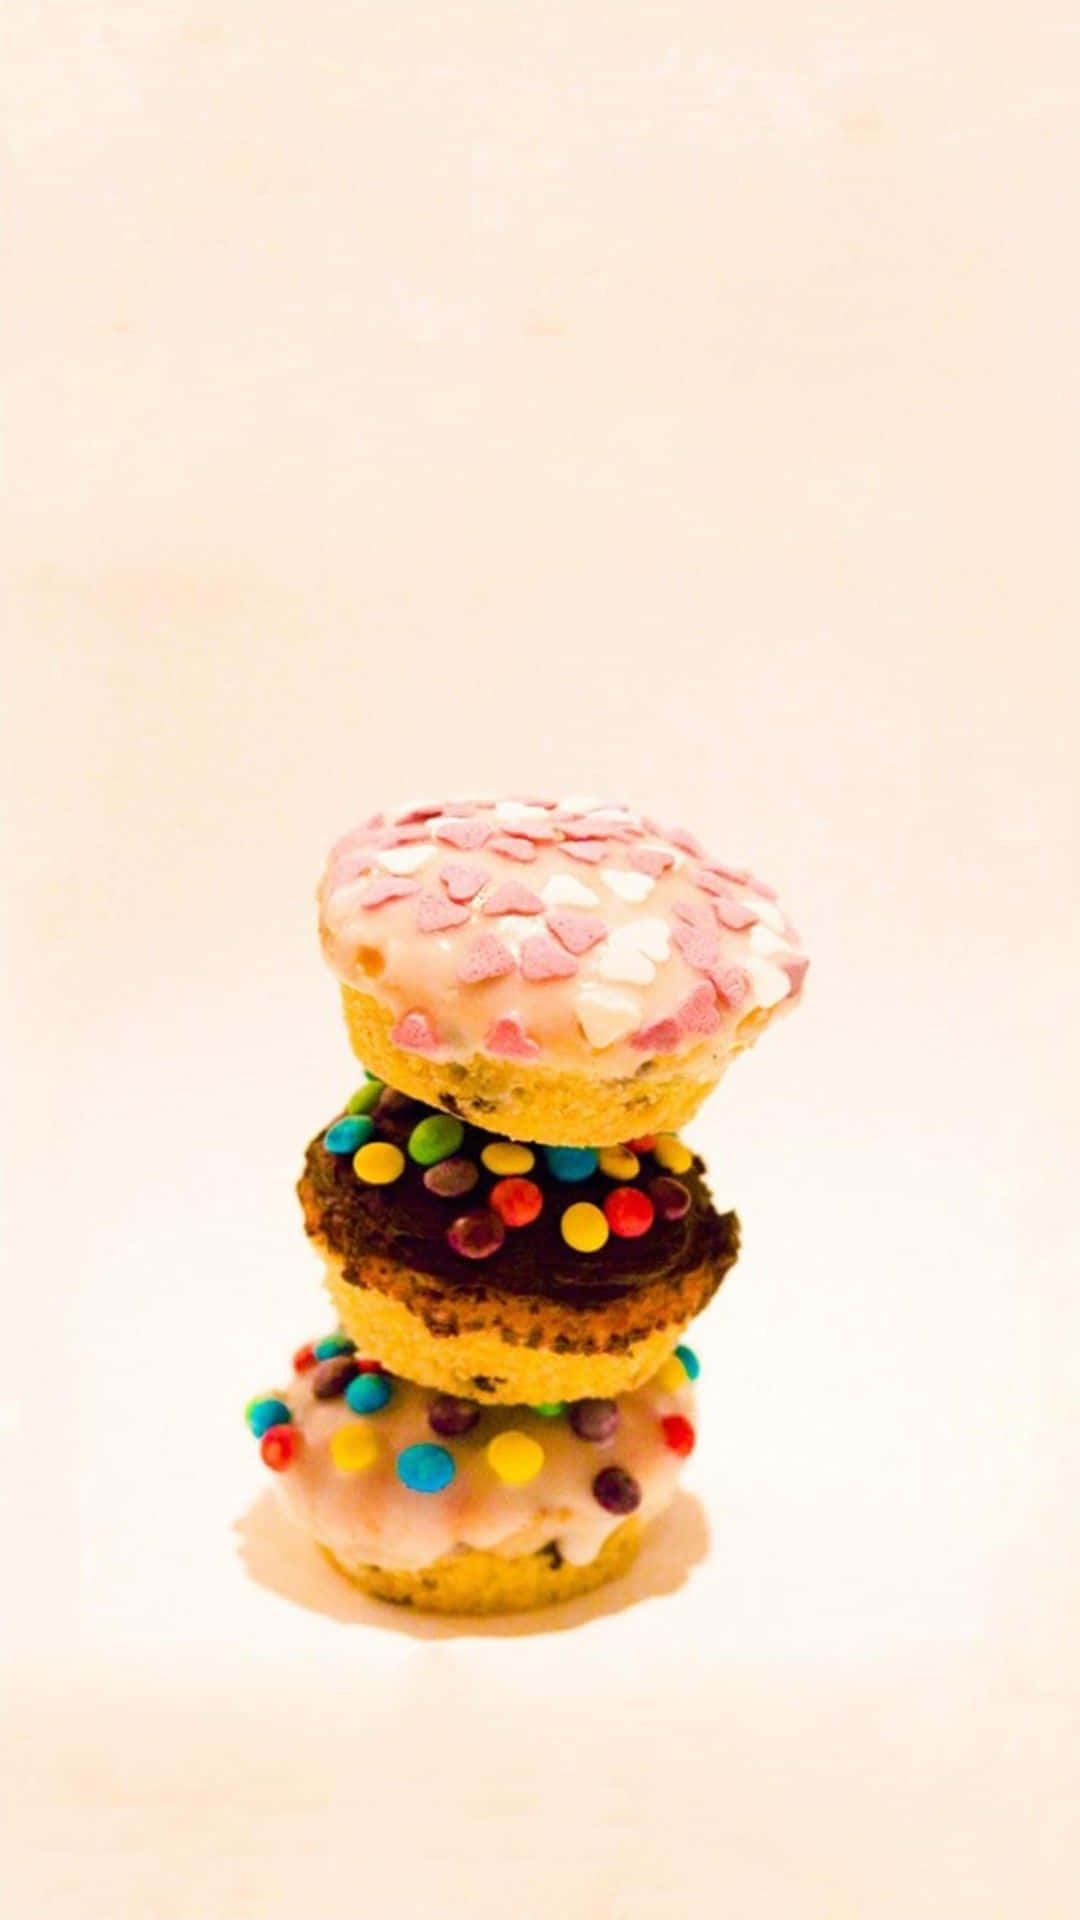 Deliciously Sweet - Indulge in this Delicious Dessert Iphone Wallpaper